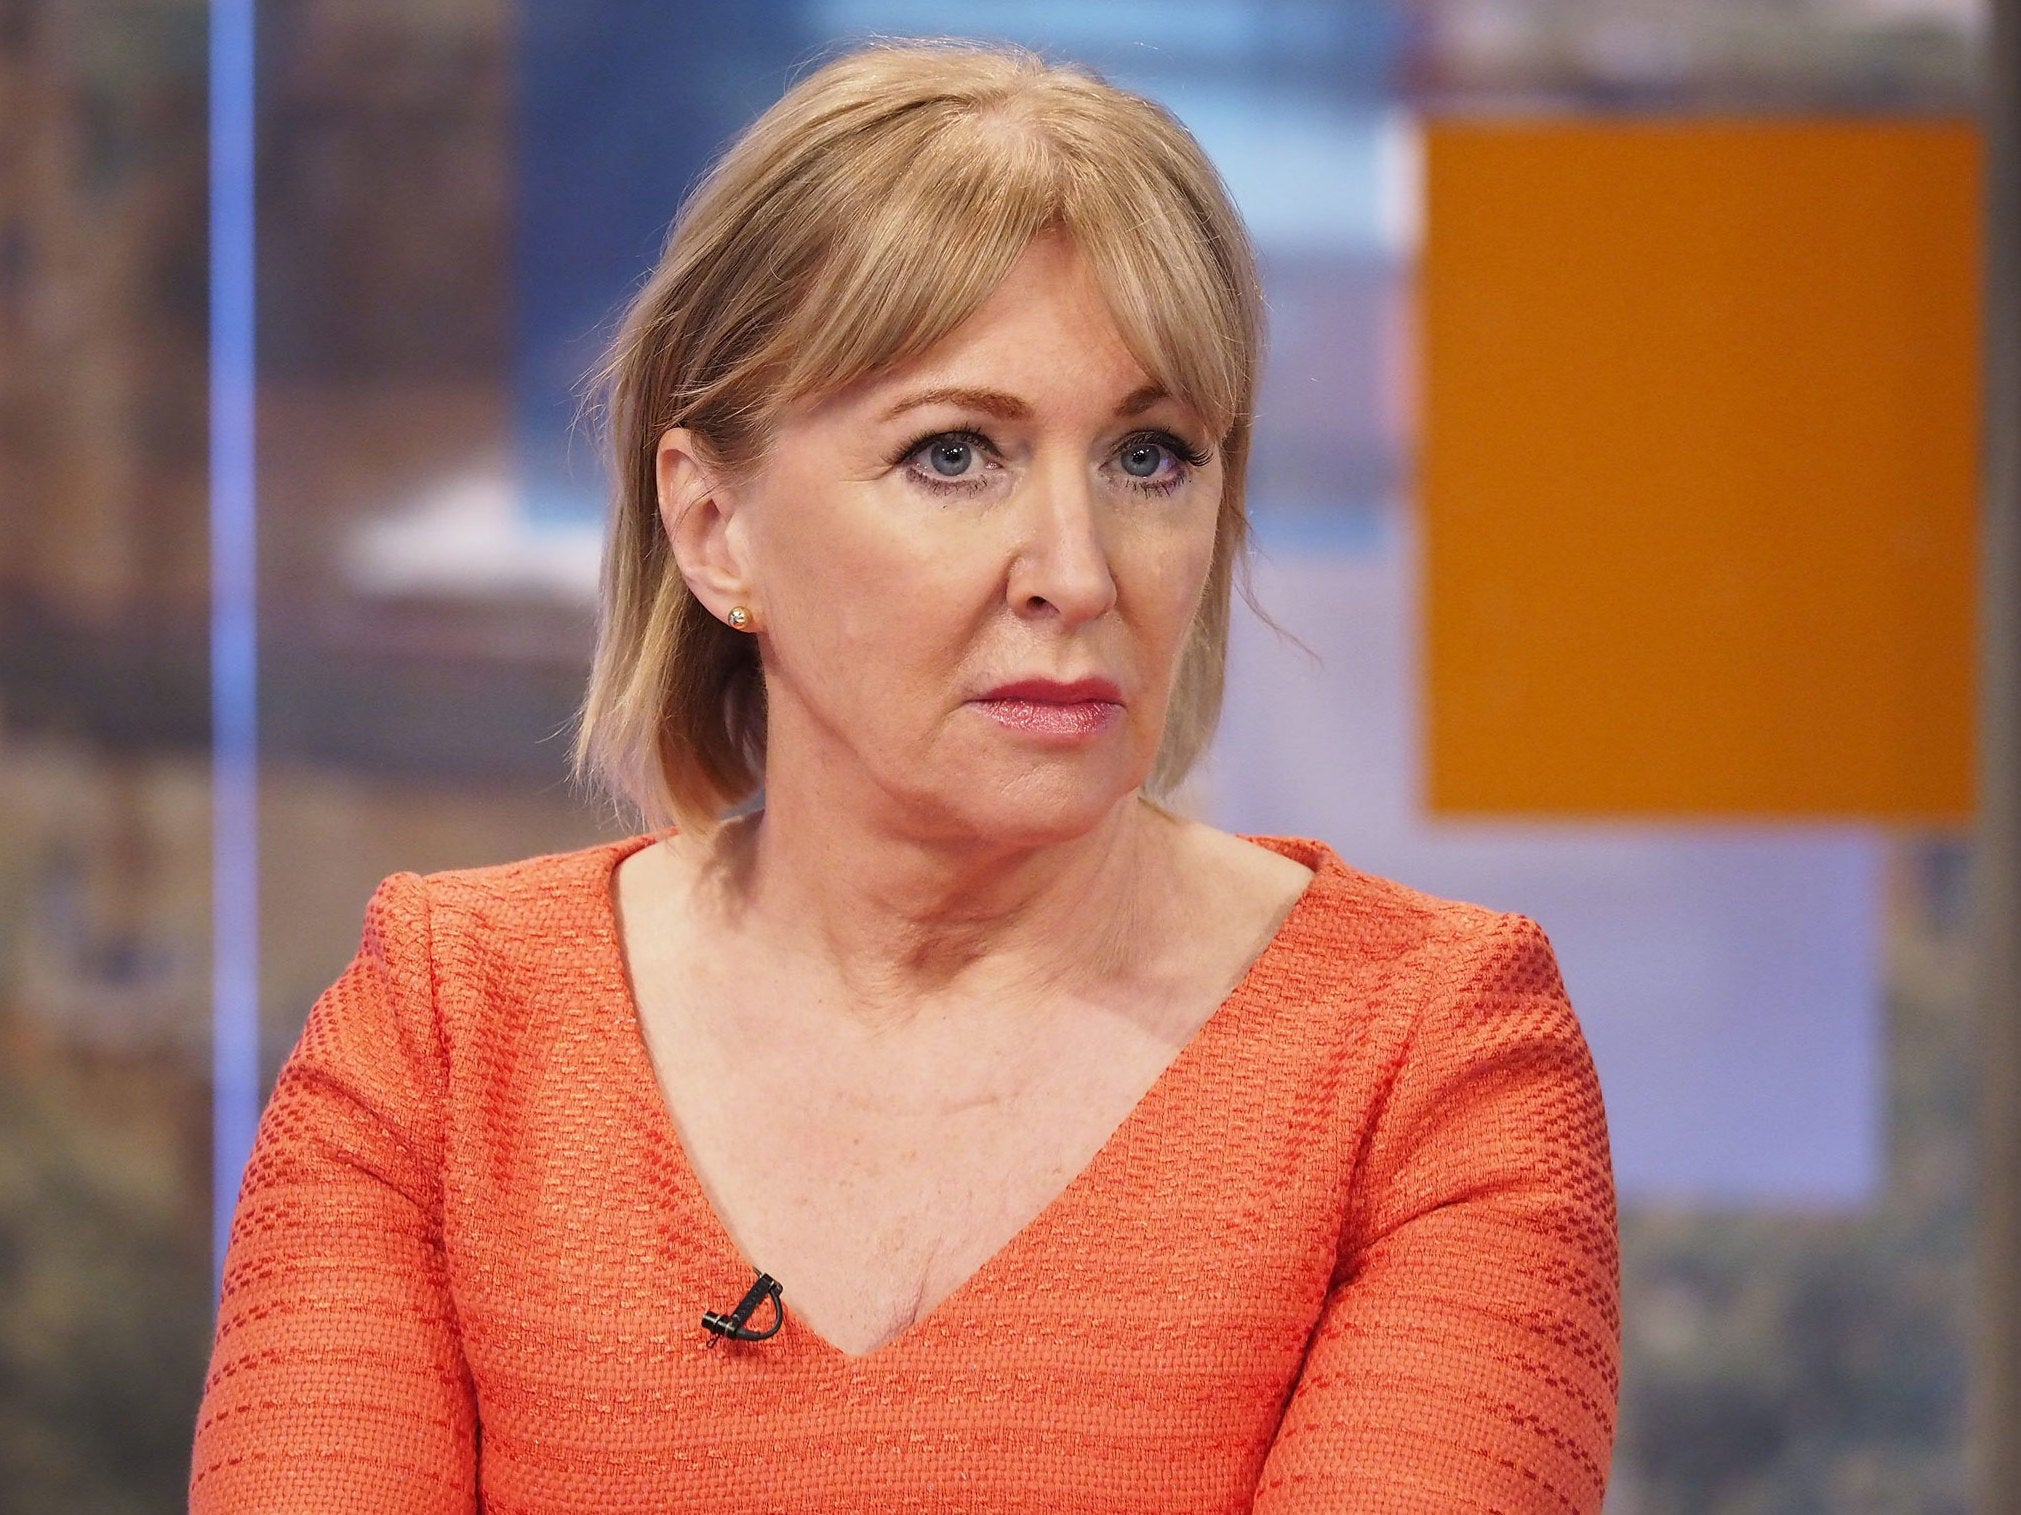 Nadine Dorries says she 'writes 1,000 words a day' to further career as novelist despite becoming Tory minister